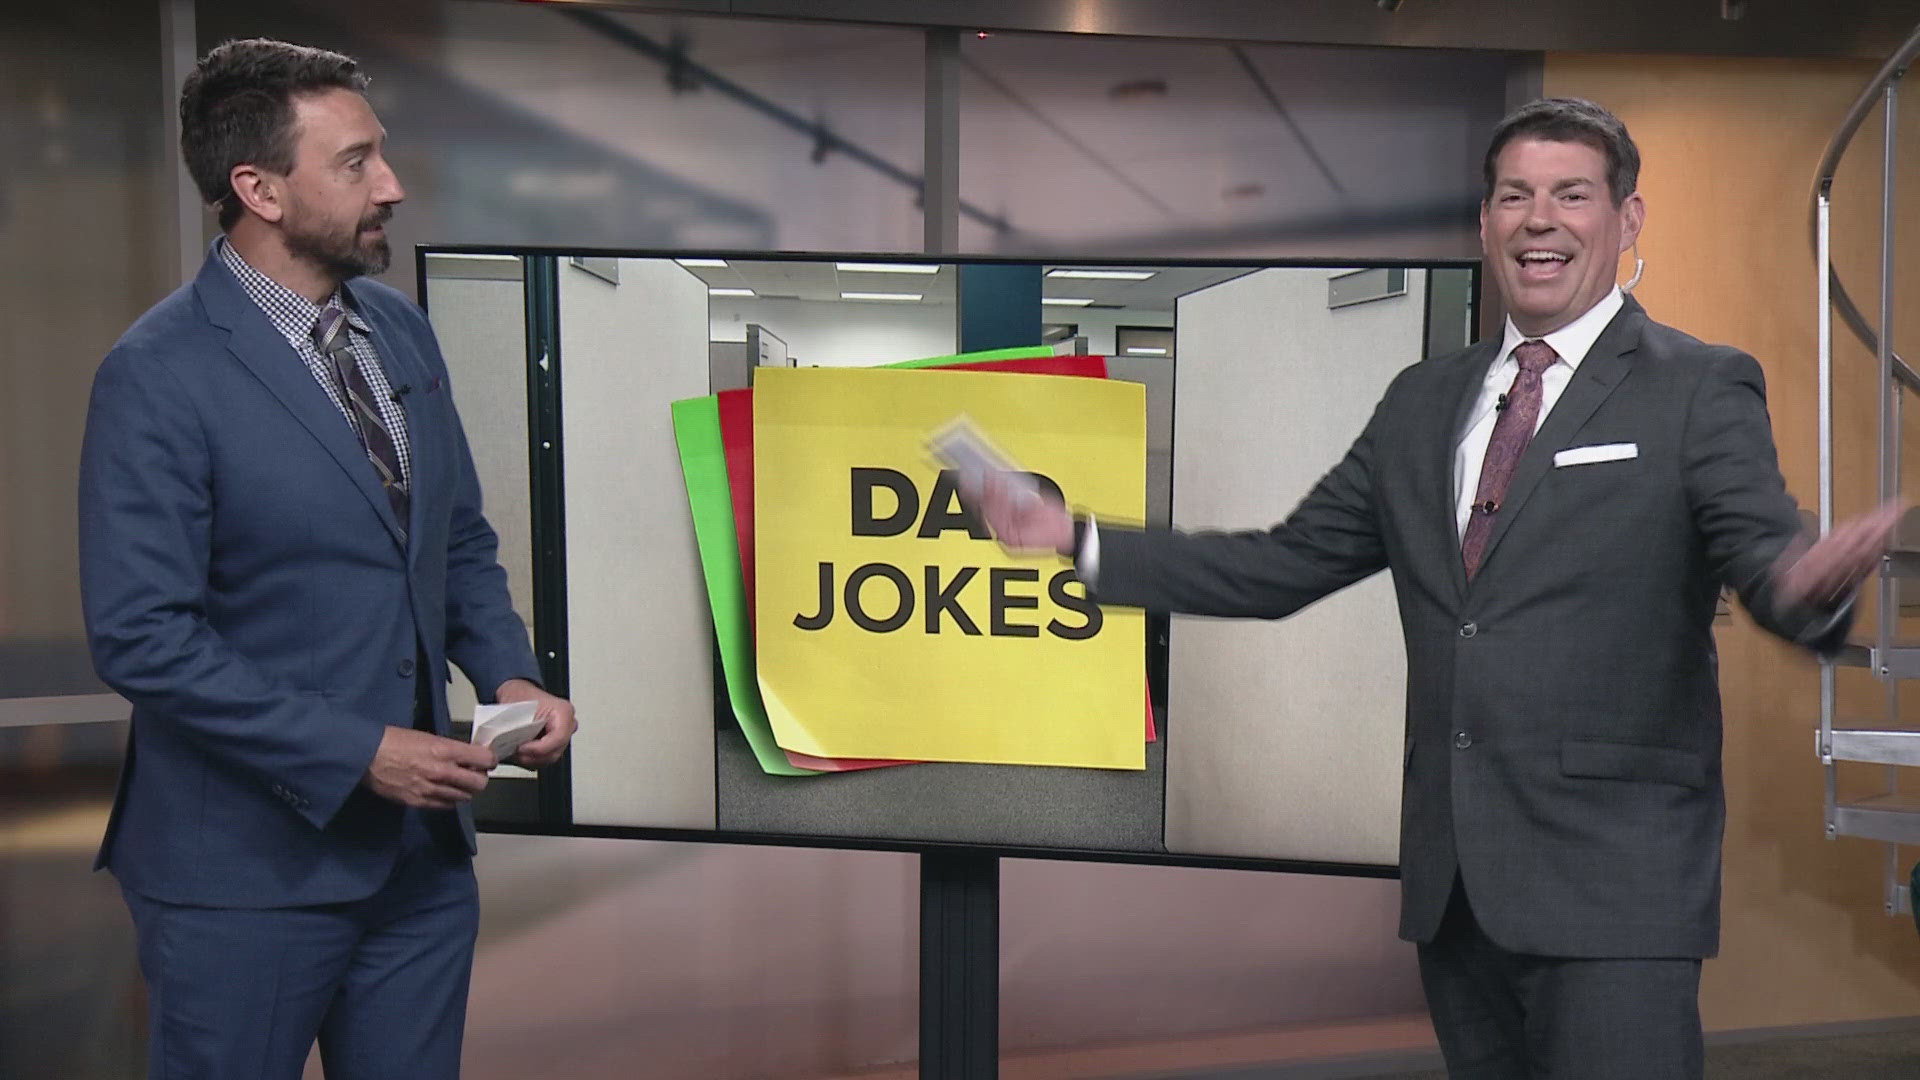 Enjoy the laughs as Matt Wintz and Dave Chudowsky unleash another round of dad jokes on WKYC.